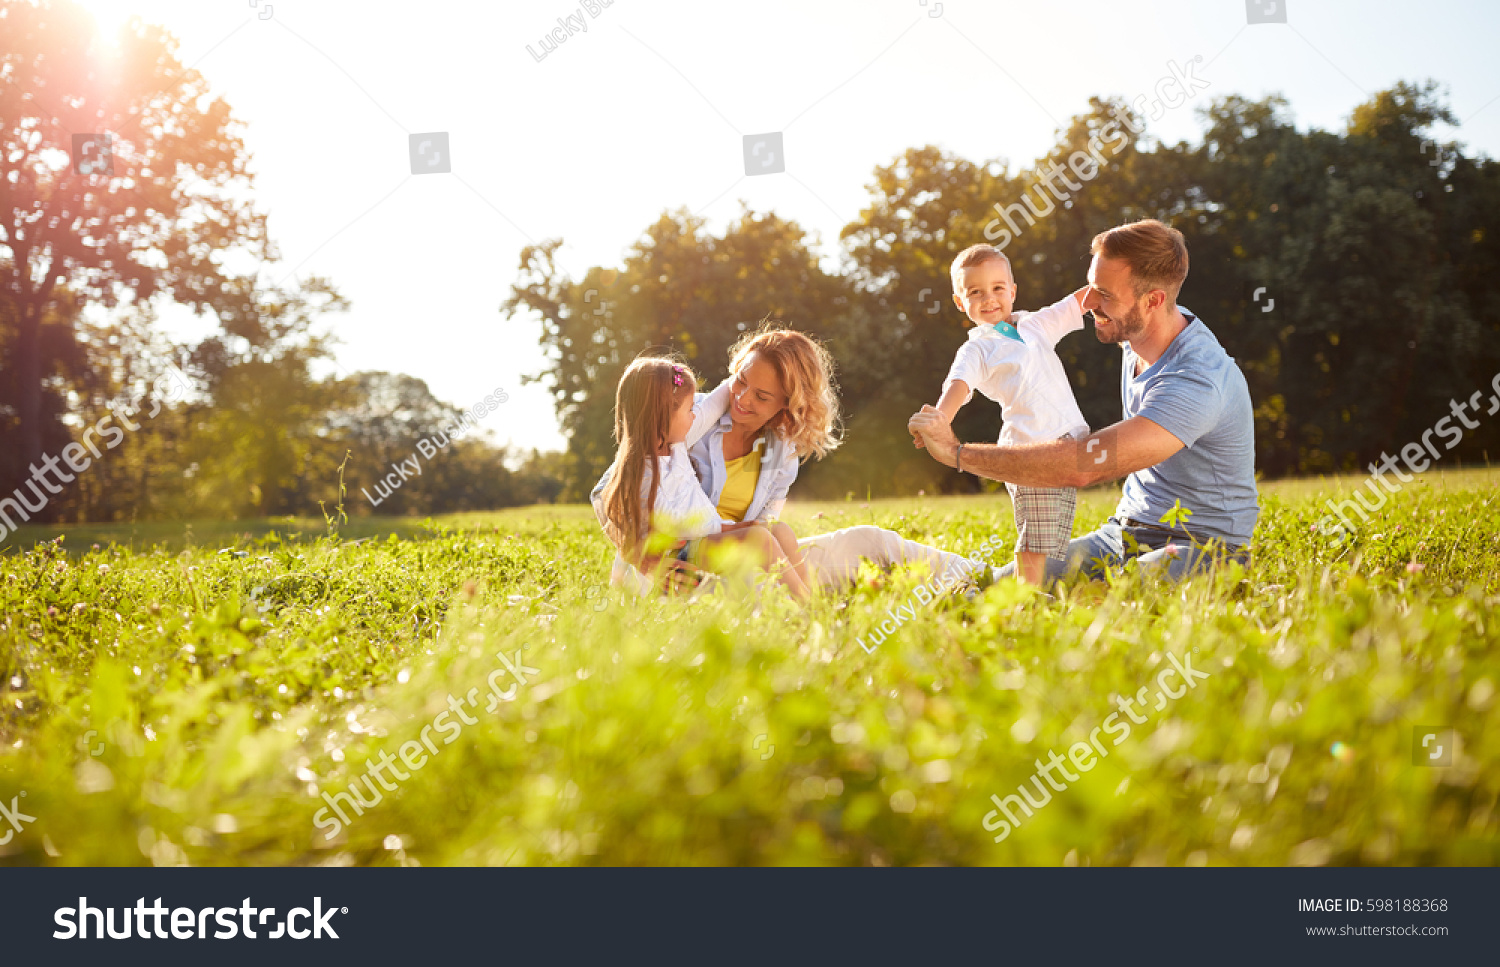 Happy male and female playing with children outside